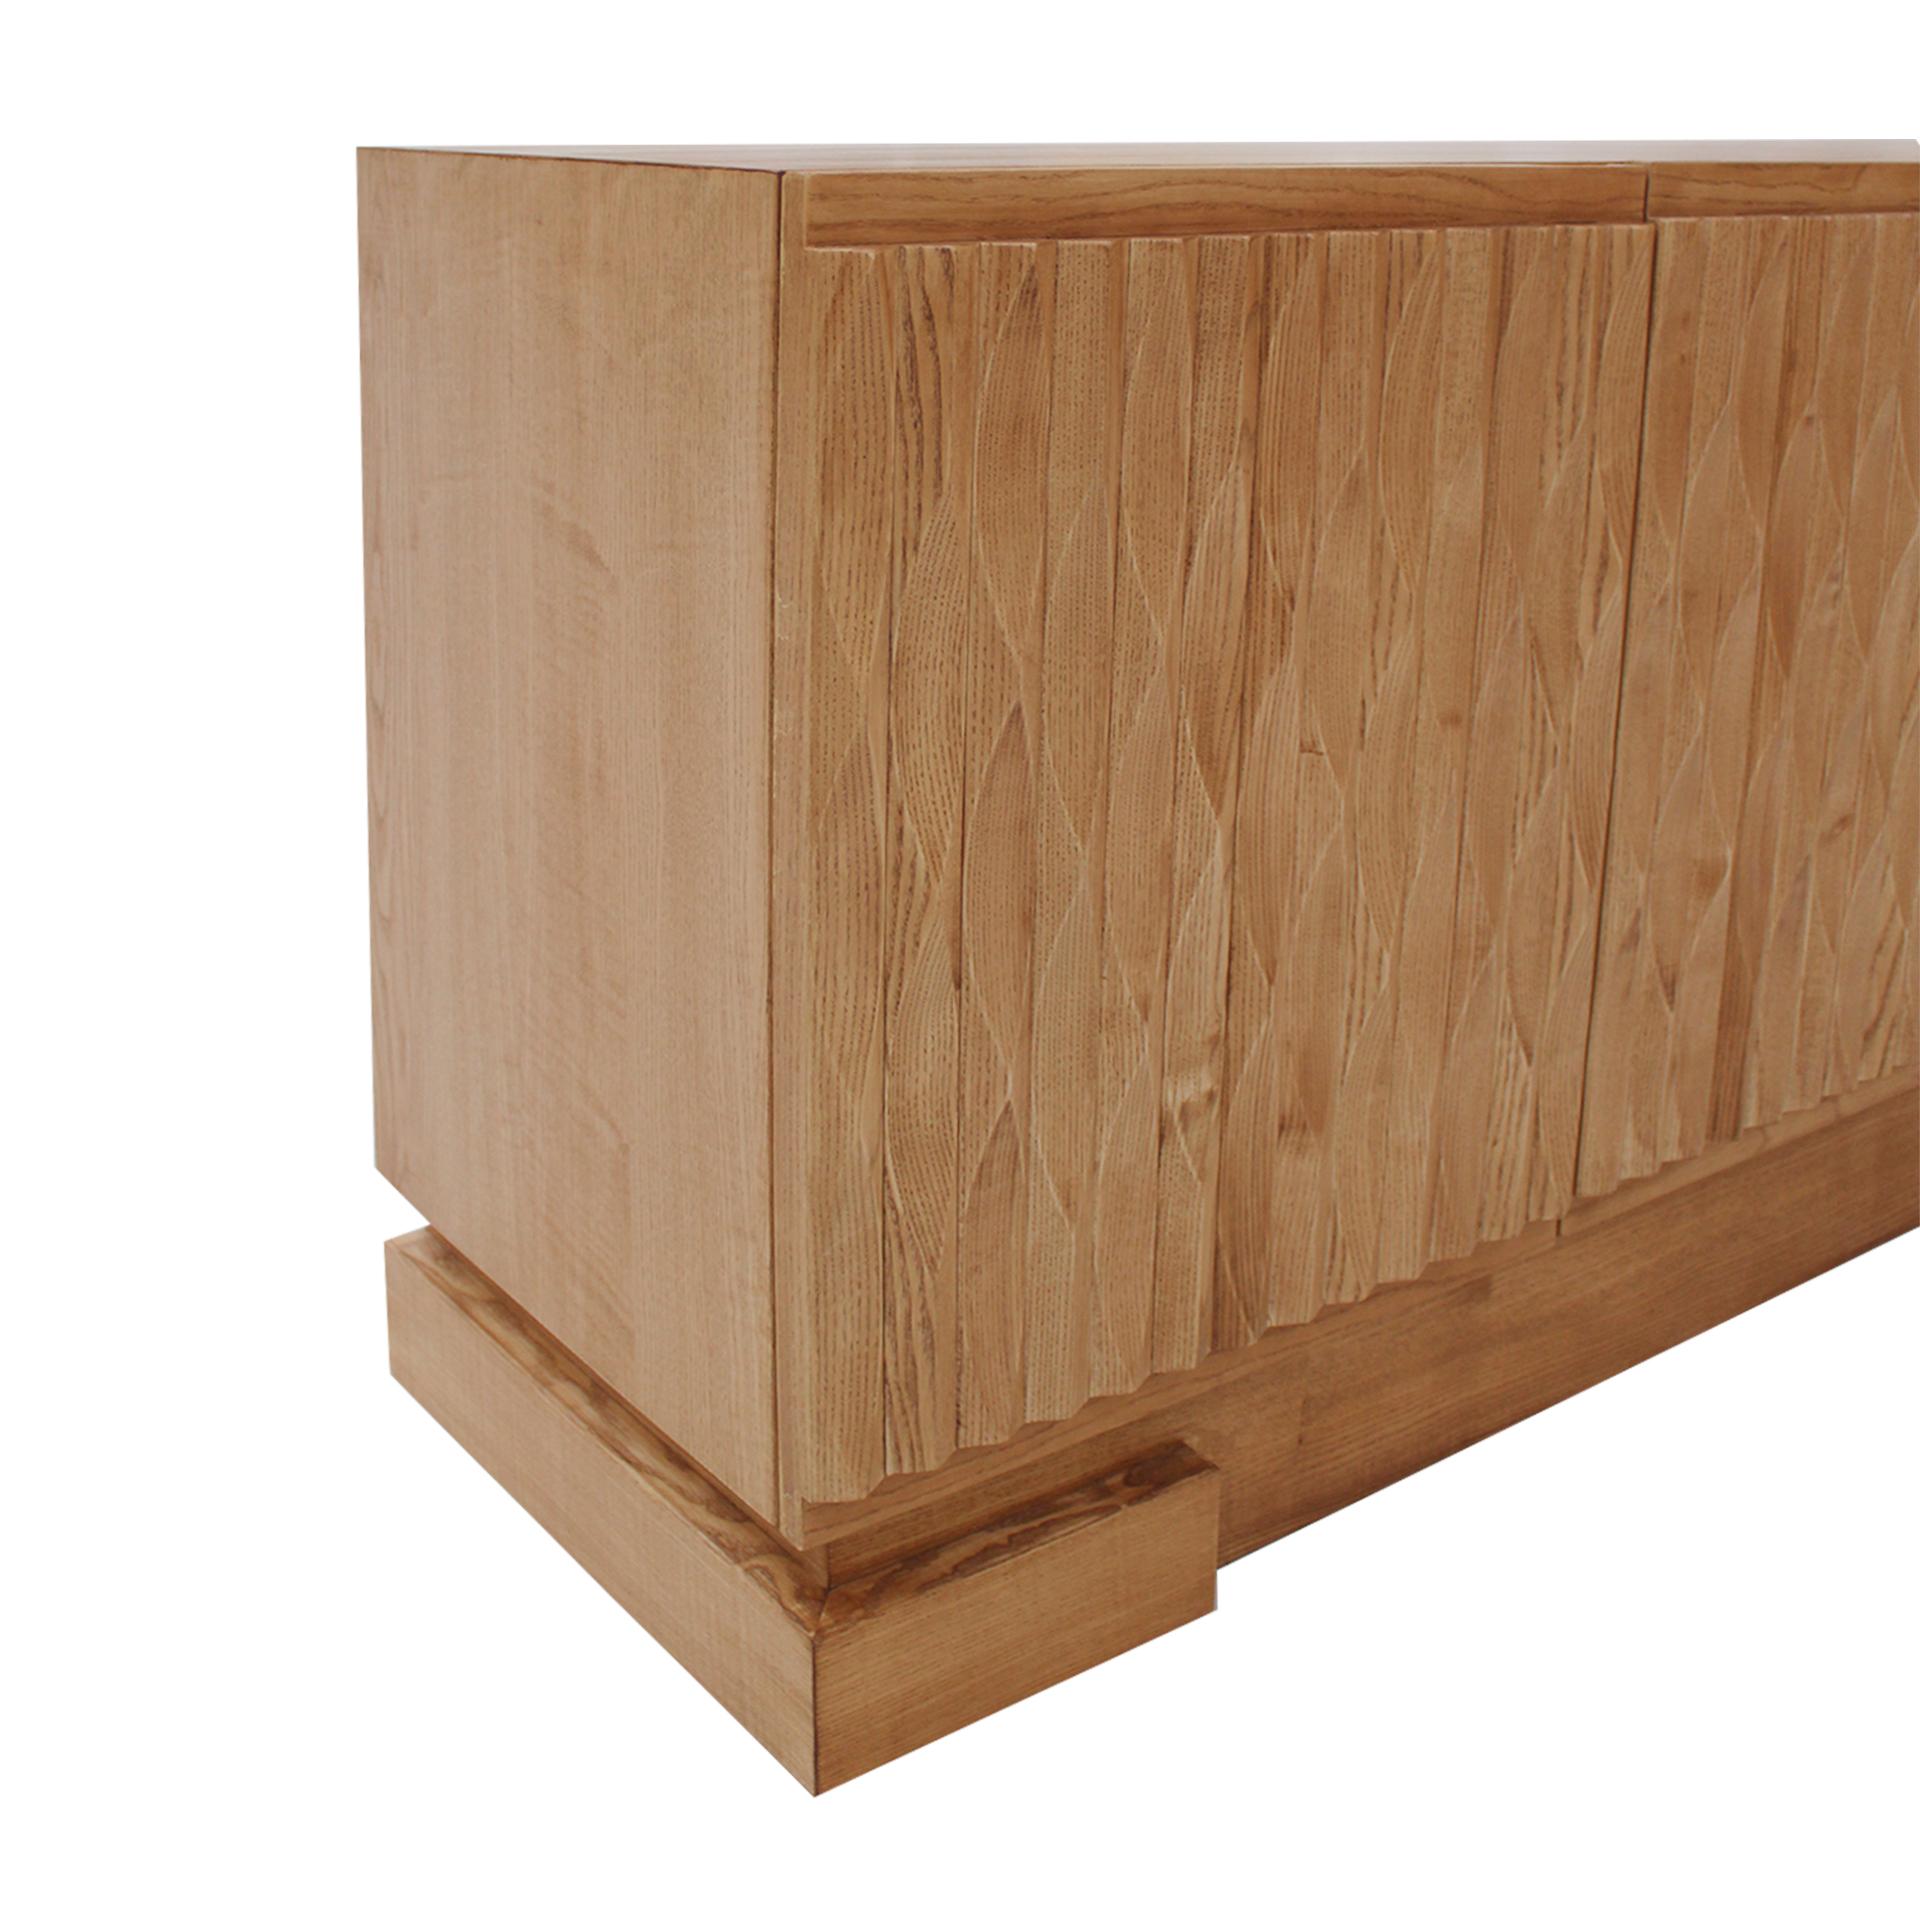 Contemporary Italian Oak Wood Sideboard with Hand Carved Patterns in the Doors, Italy